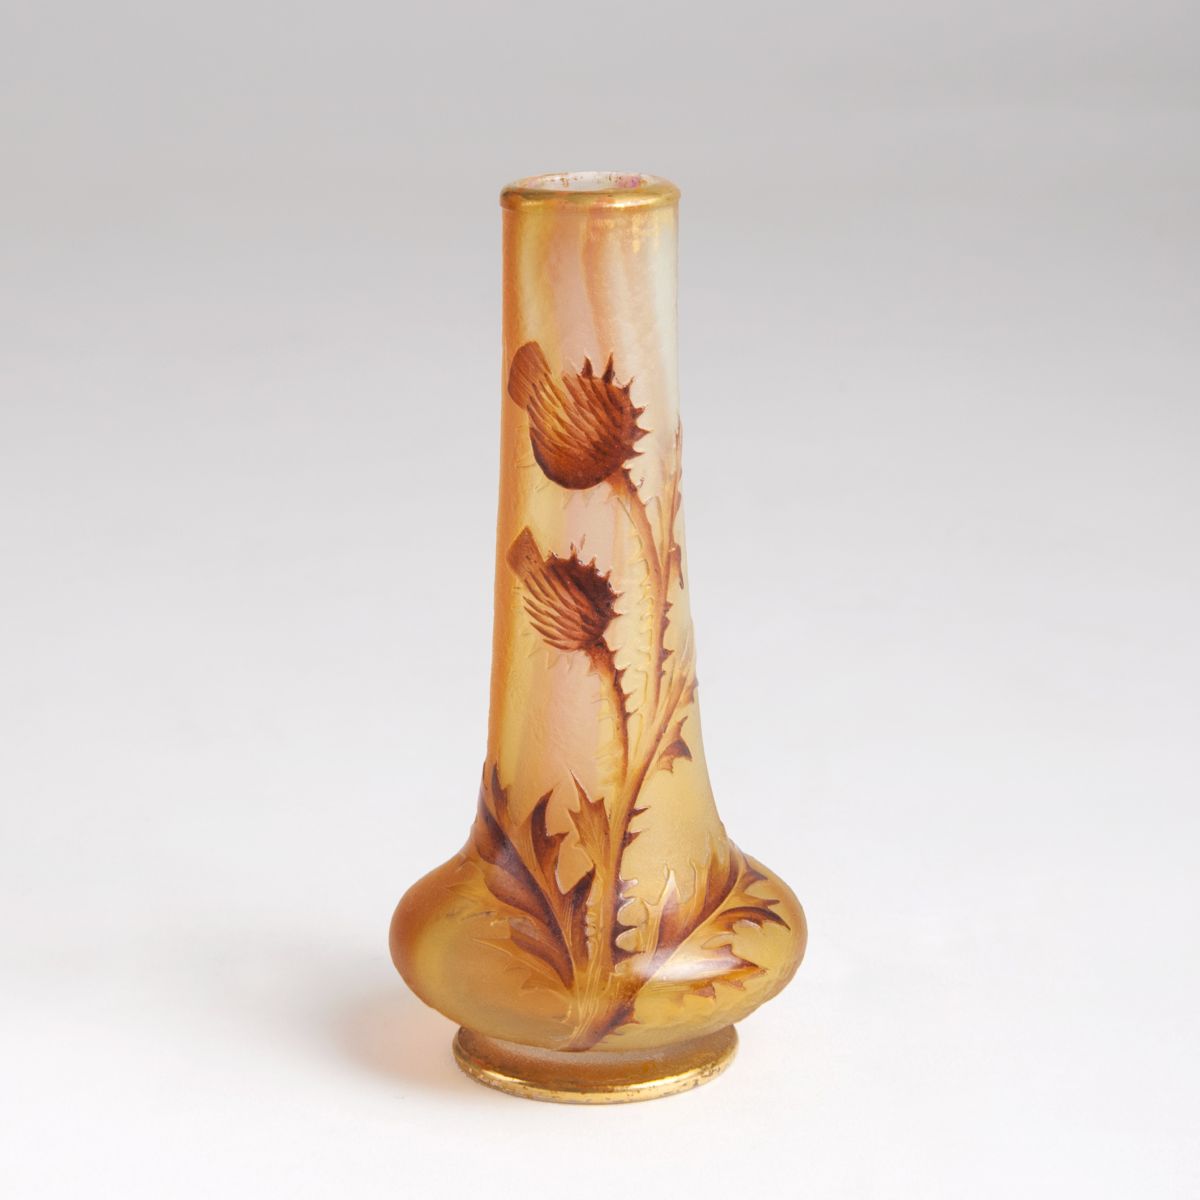 A small narrow neck Vase with Thistles